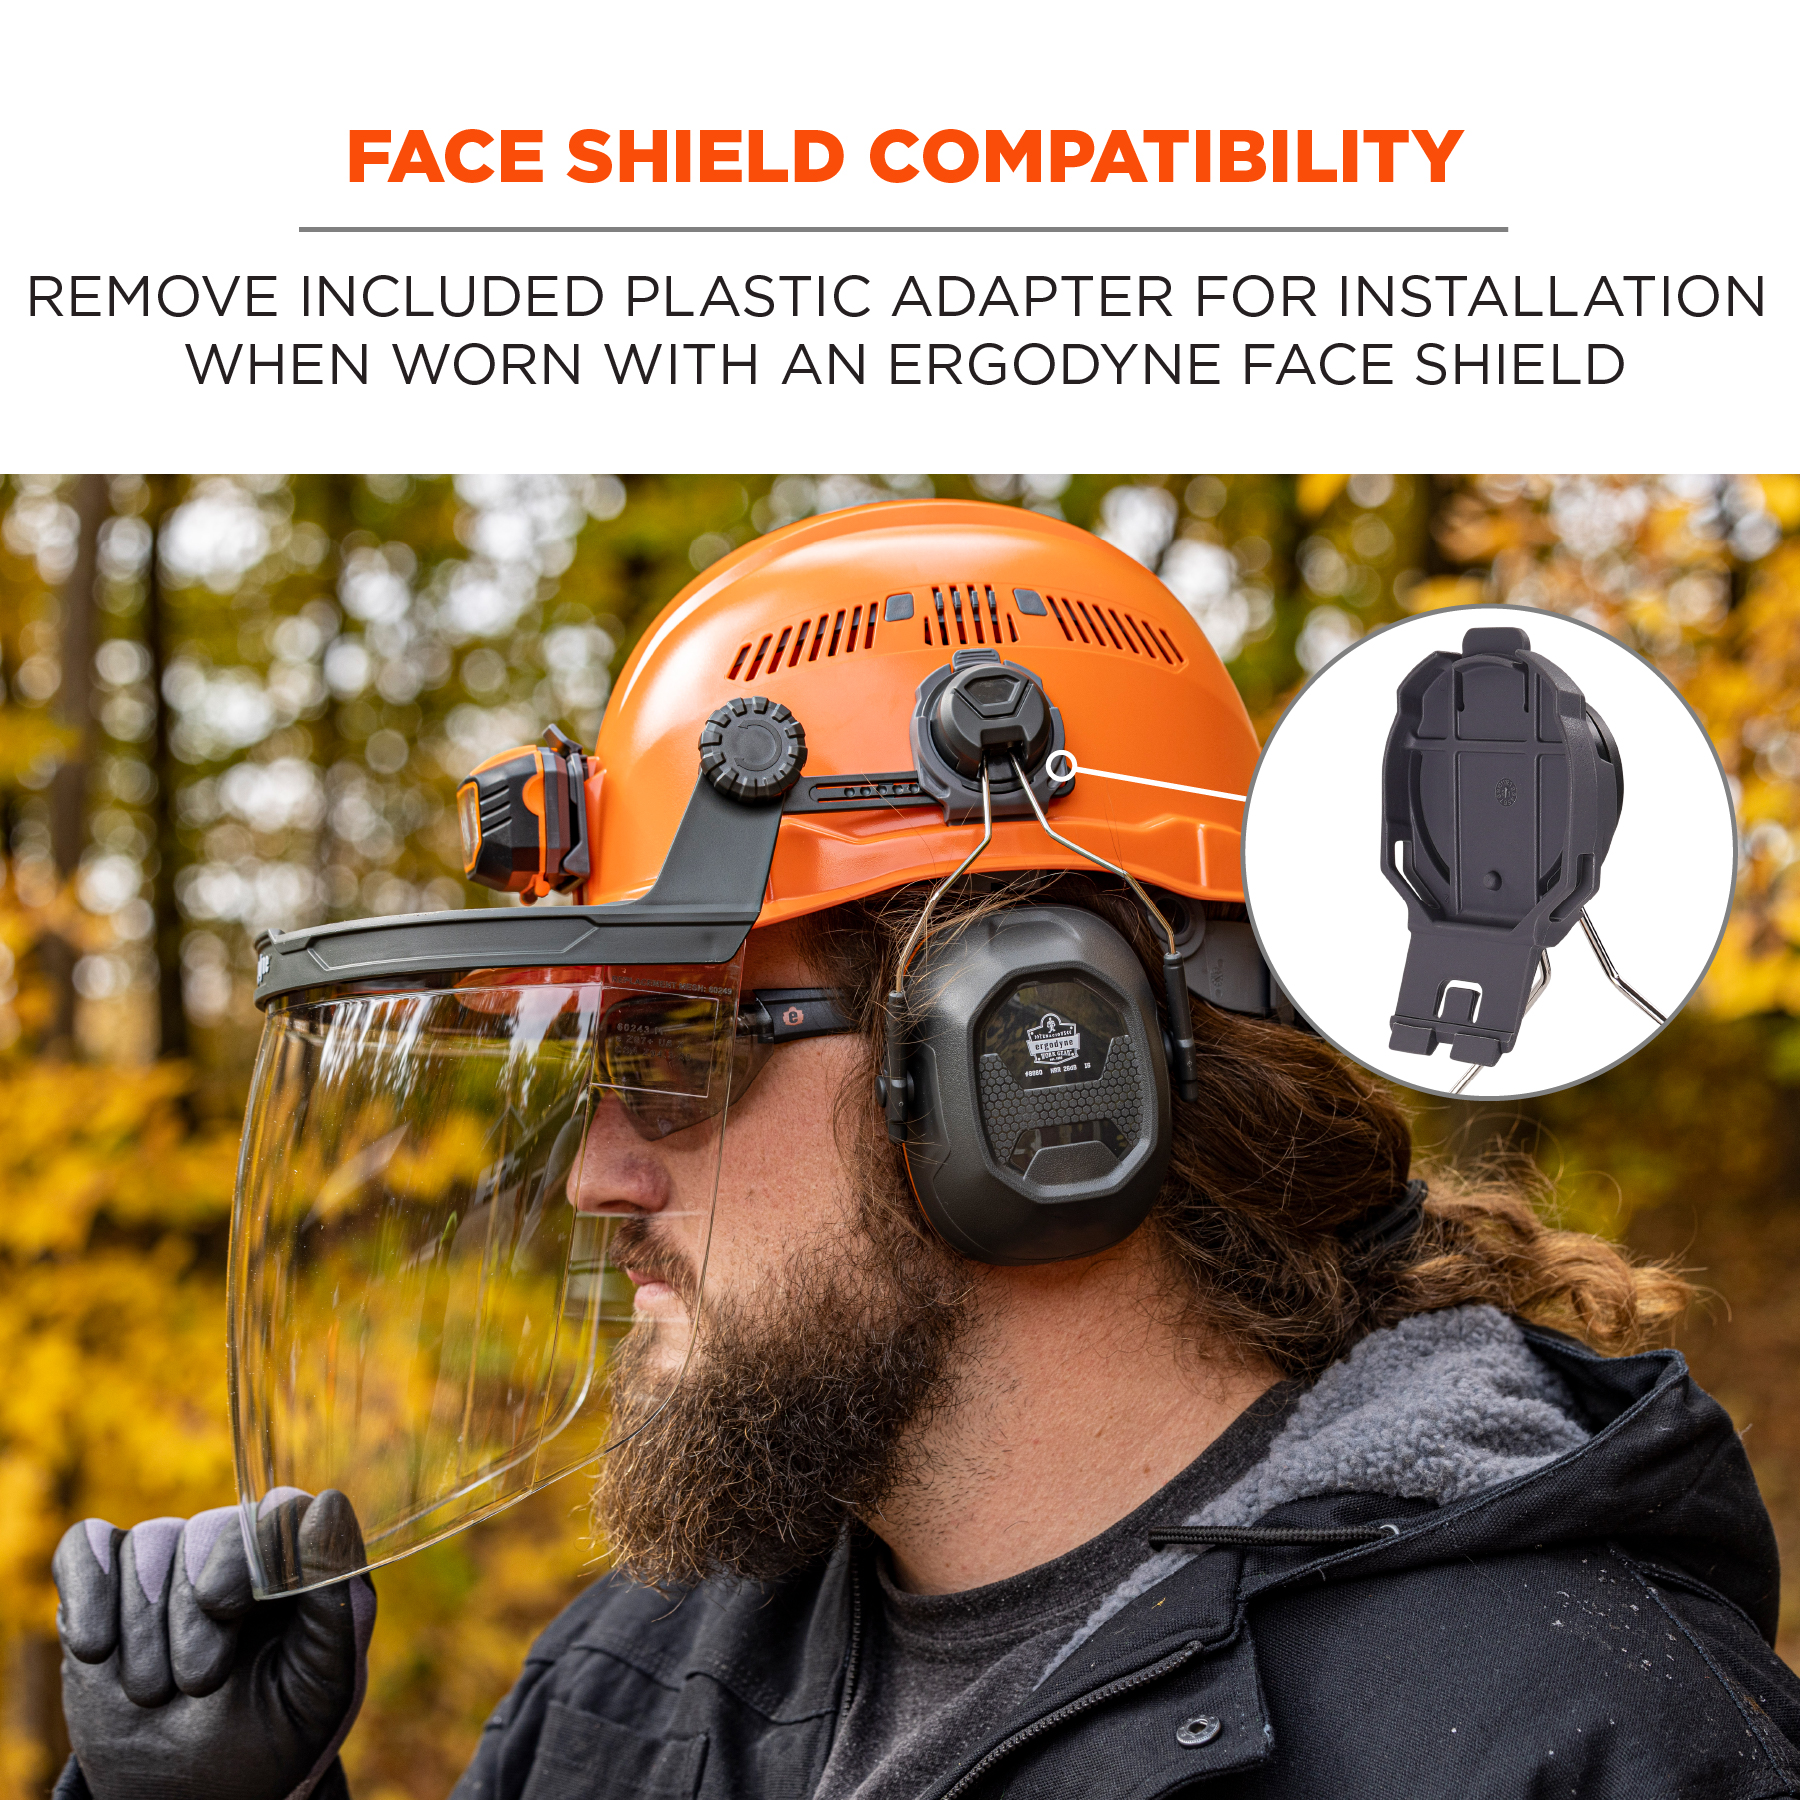 https://www.ergodyne.com/sites/default/files/product-images/60258-8880-nrr-26db-hard-hat-mounted-earmuffs-cap-style-face-shield-compatible.jpg